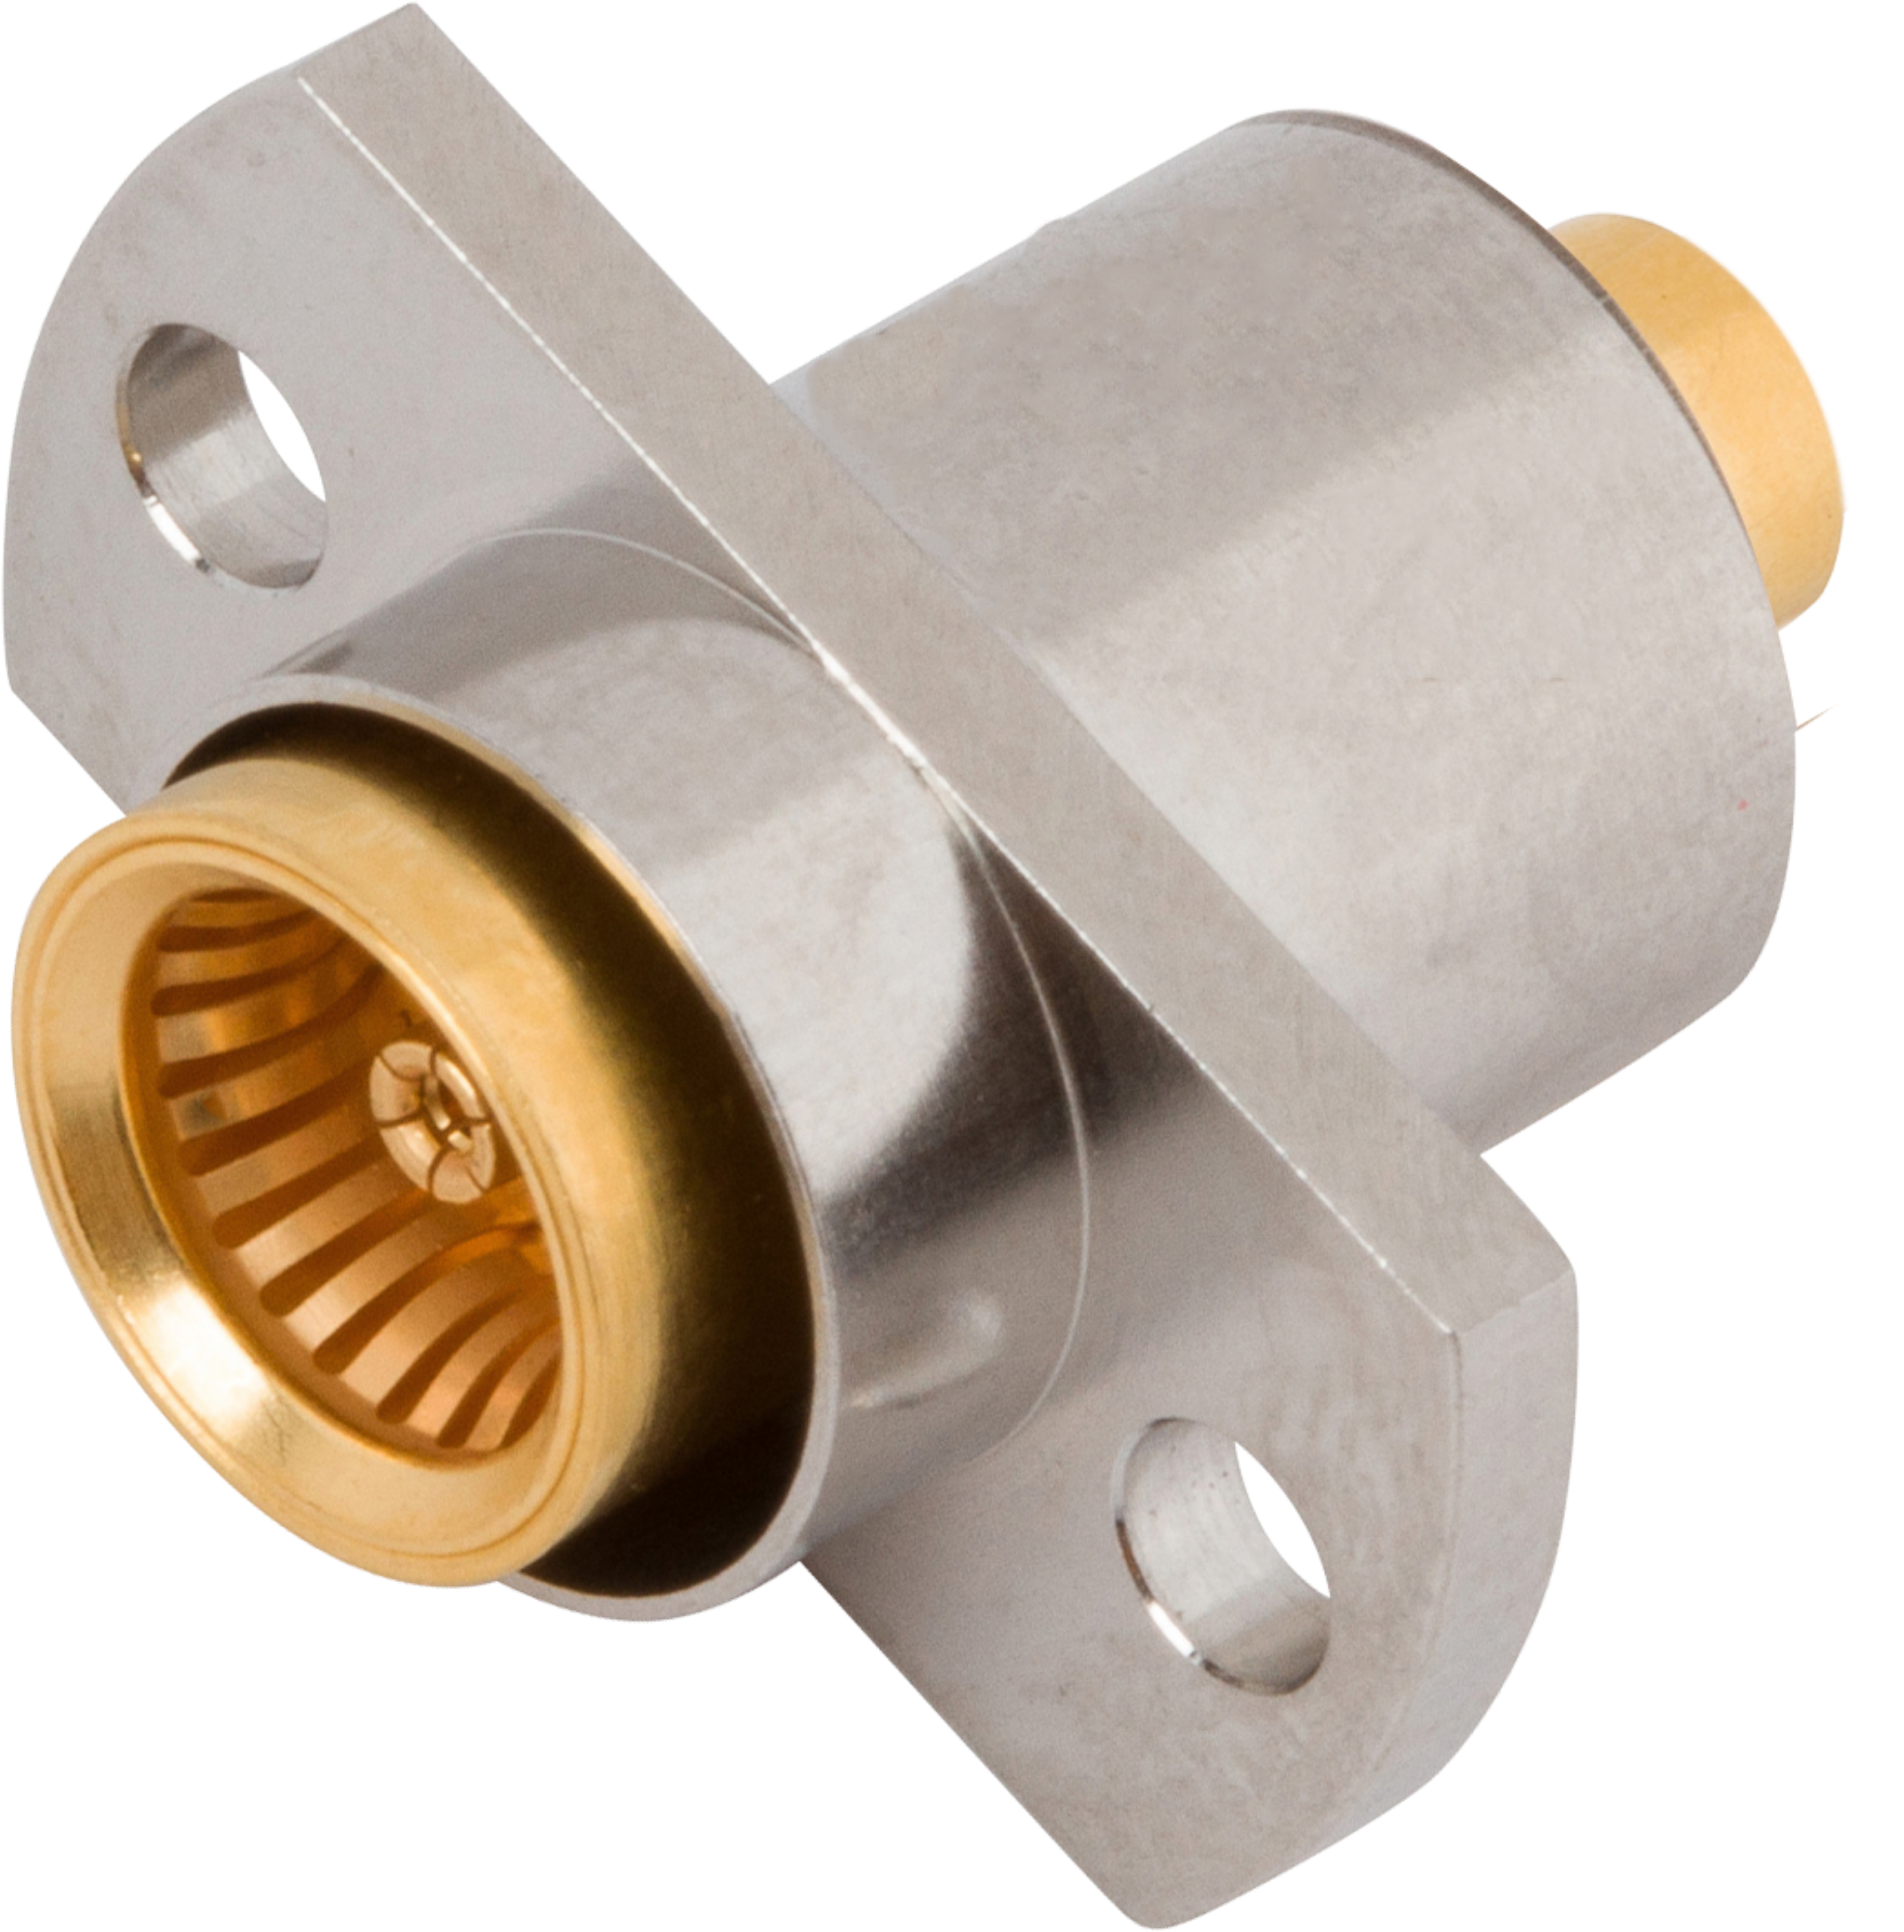 Picture of BMA Female Flange Mount Connector, 2 Hole, for .141 Cable